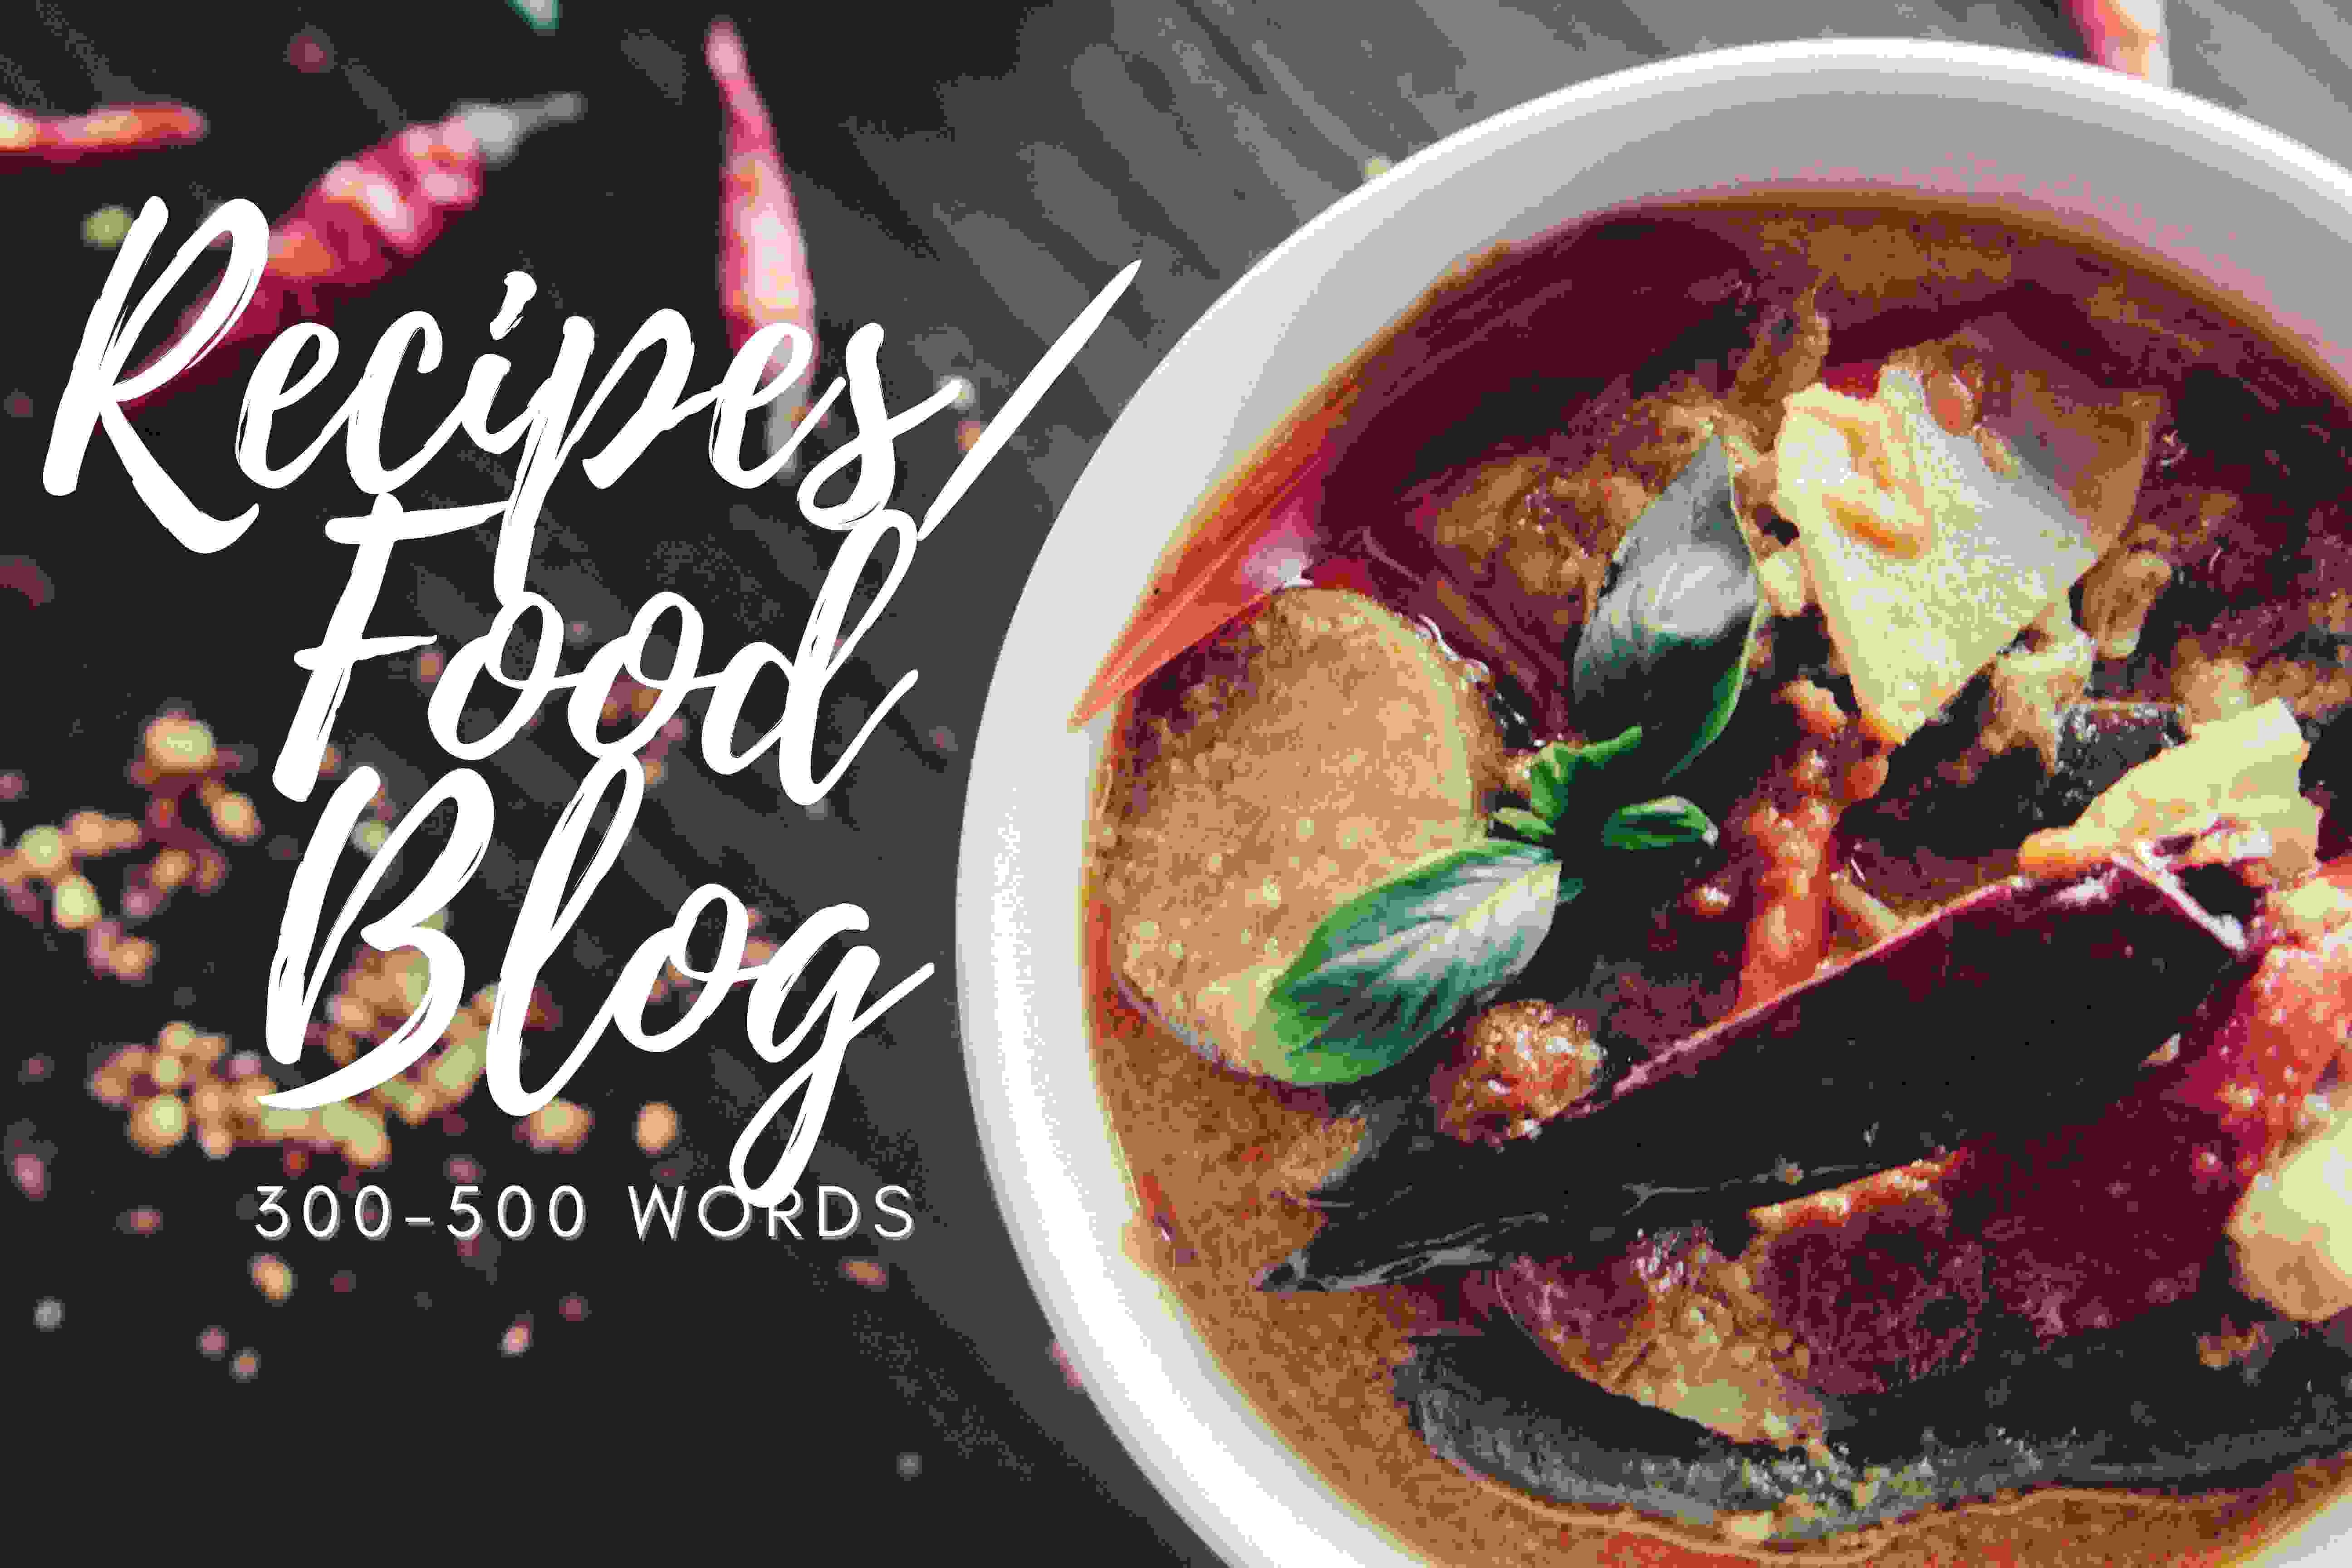 I will write 300-500 words mouthwatering recipes and food blogs for you